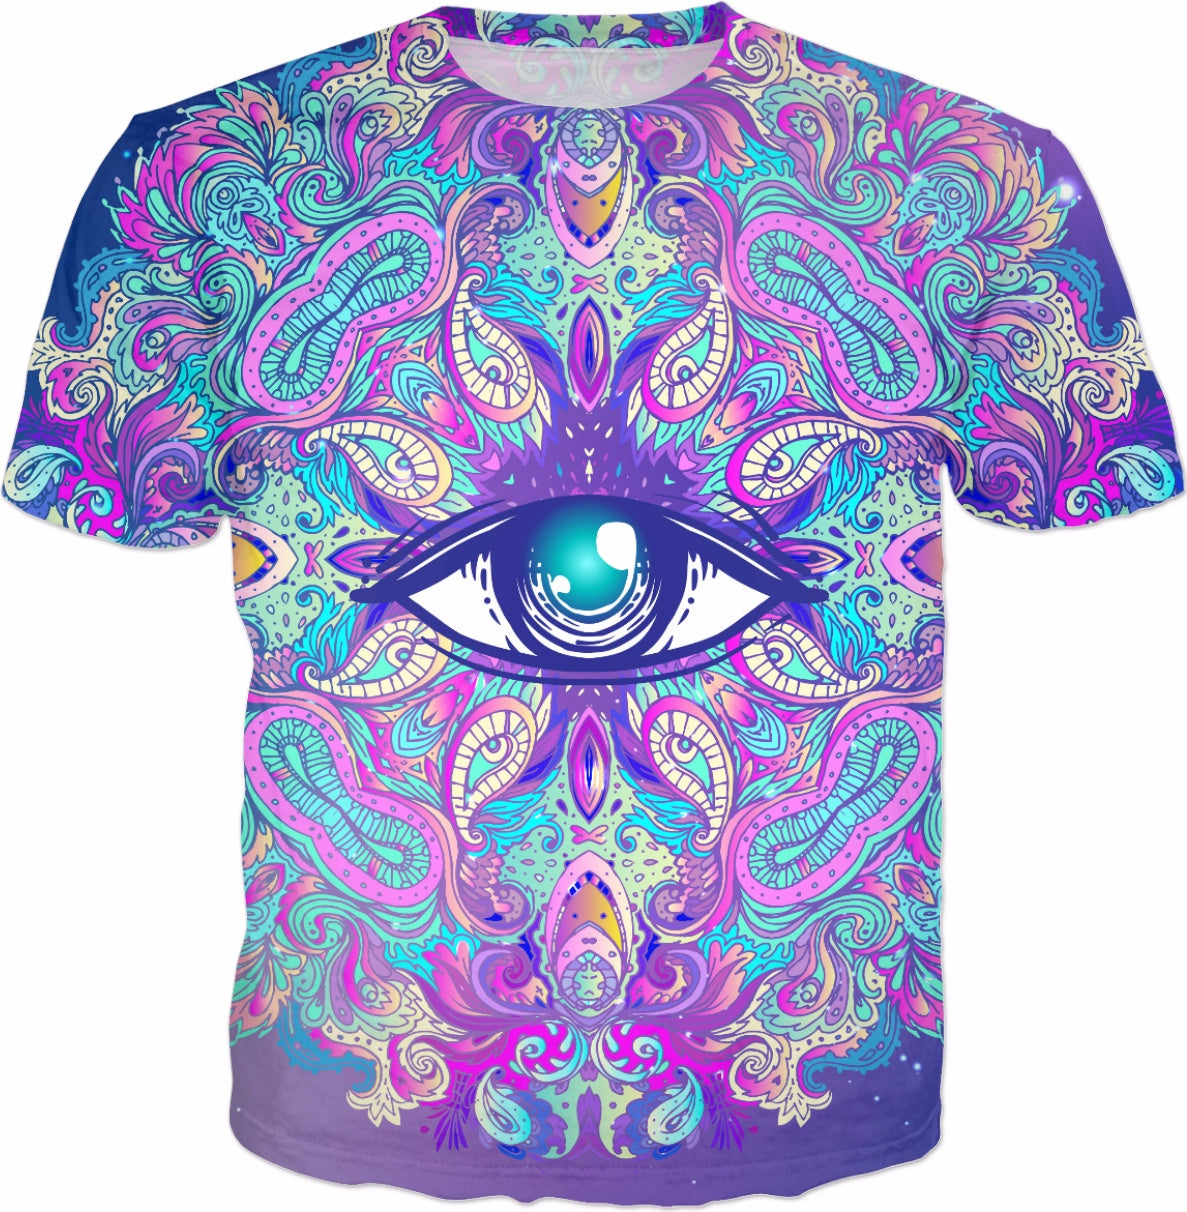 Psychedelic Festival T-Shirt